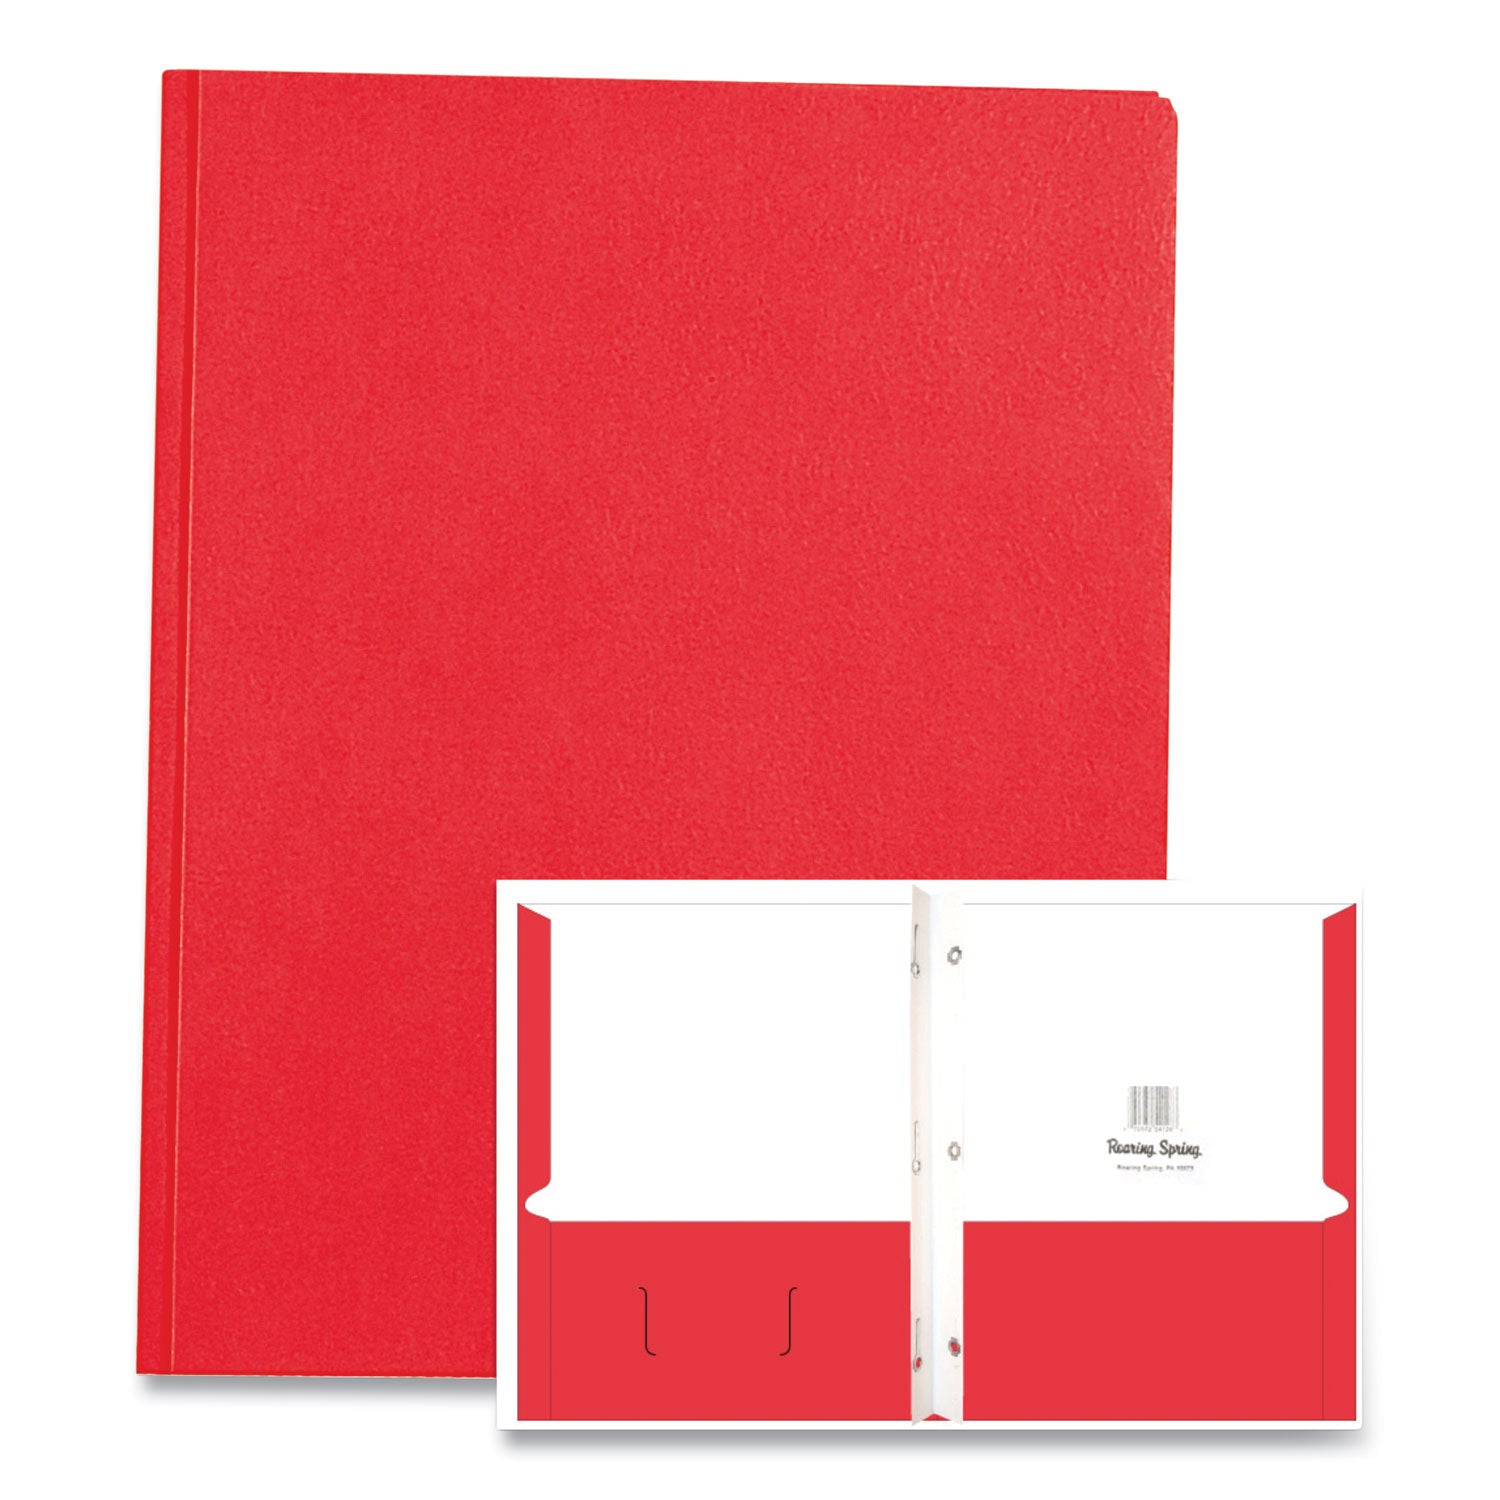 pocket-folder-with-3-fasteners-05-capacity-11-x-85-red-25-box-10-boxes-carton-ships-in-4-6-business-days_roa54126cs - 2